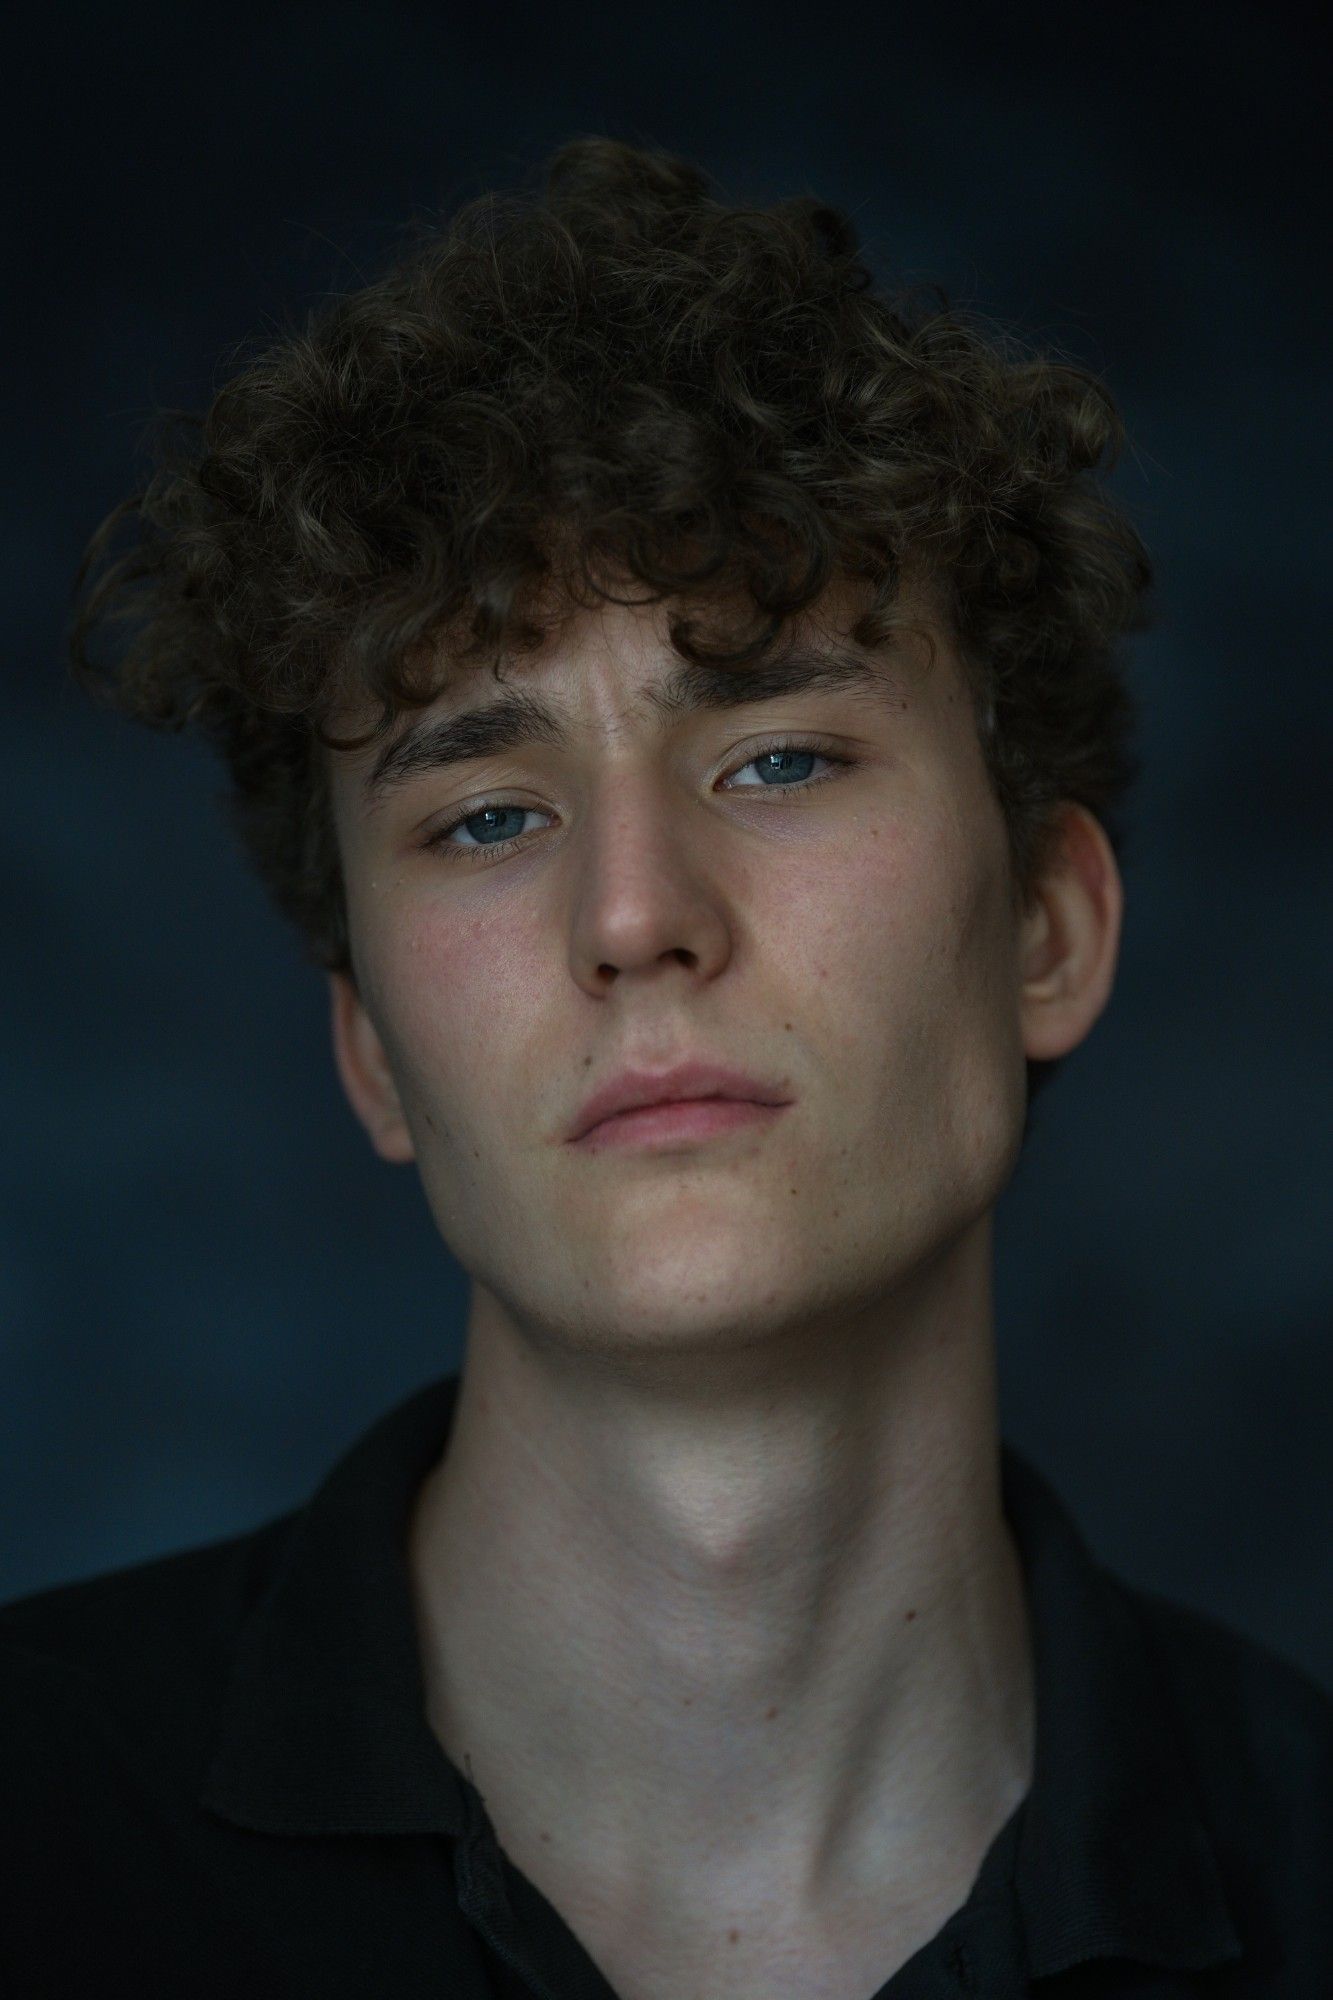 Lucas - a model from Fribourg, Switzerland